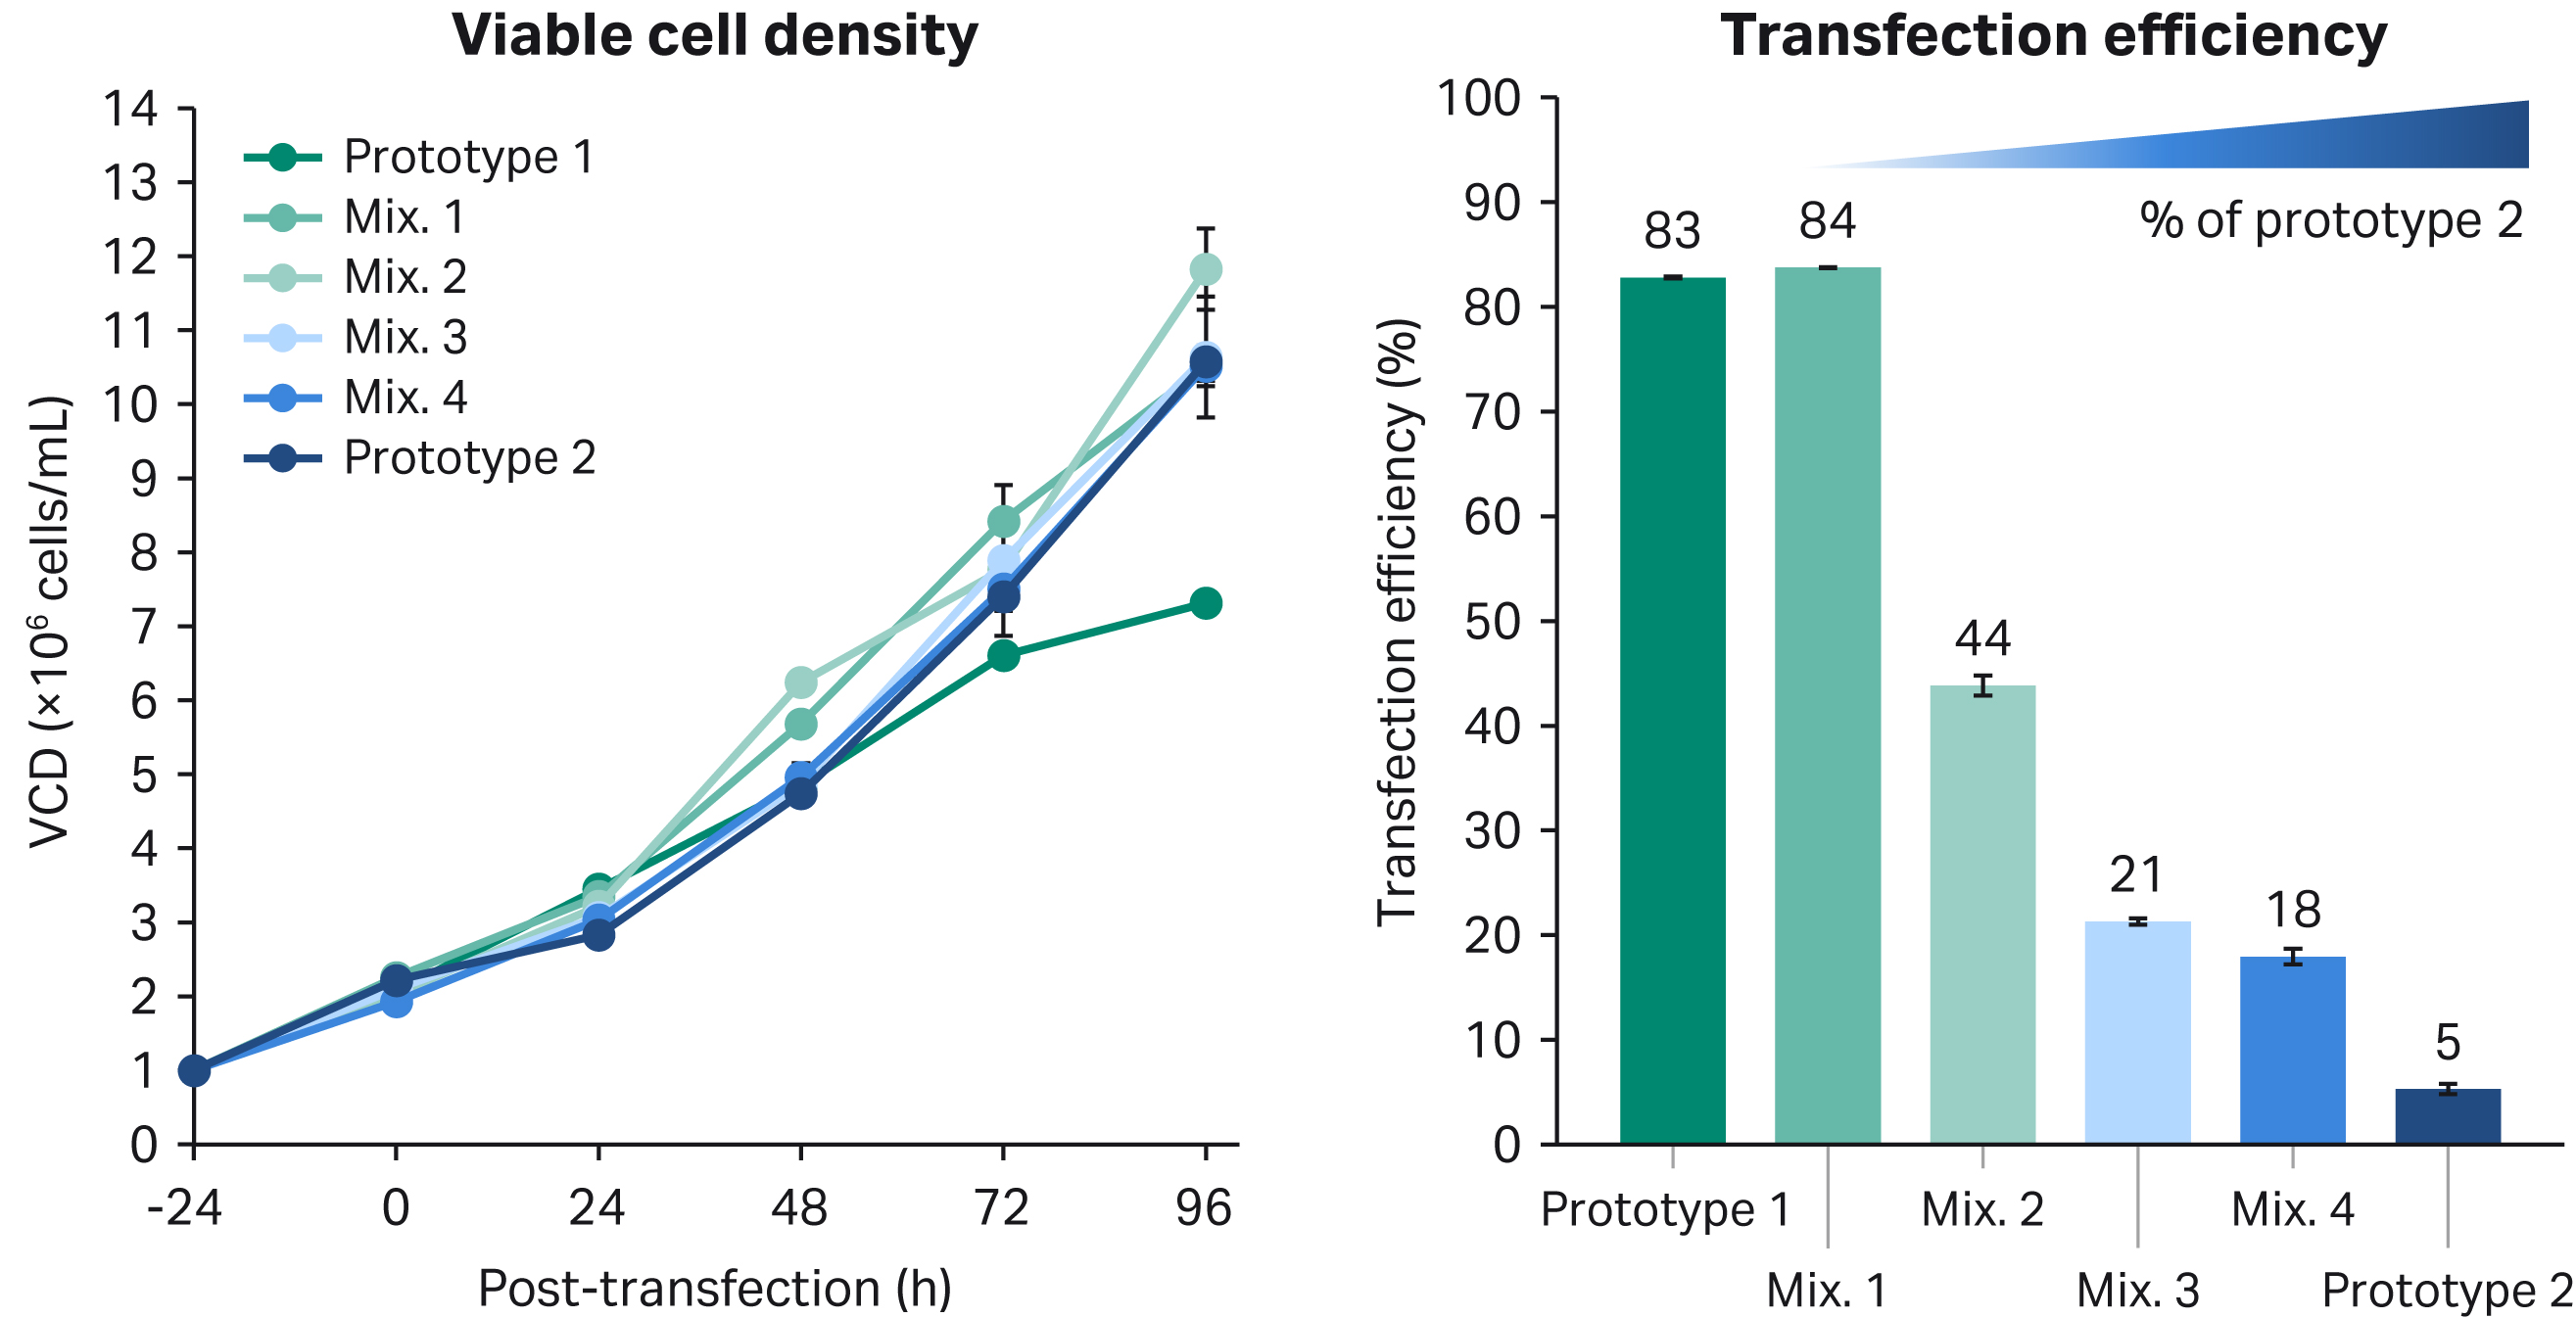 Viable cell density and transfection efficiency of two HyClone™ HEK293 transfection media prototypes using mixture DoE design